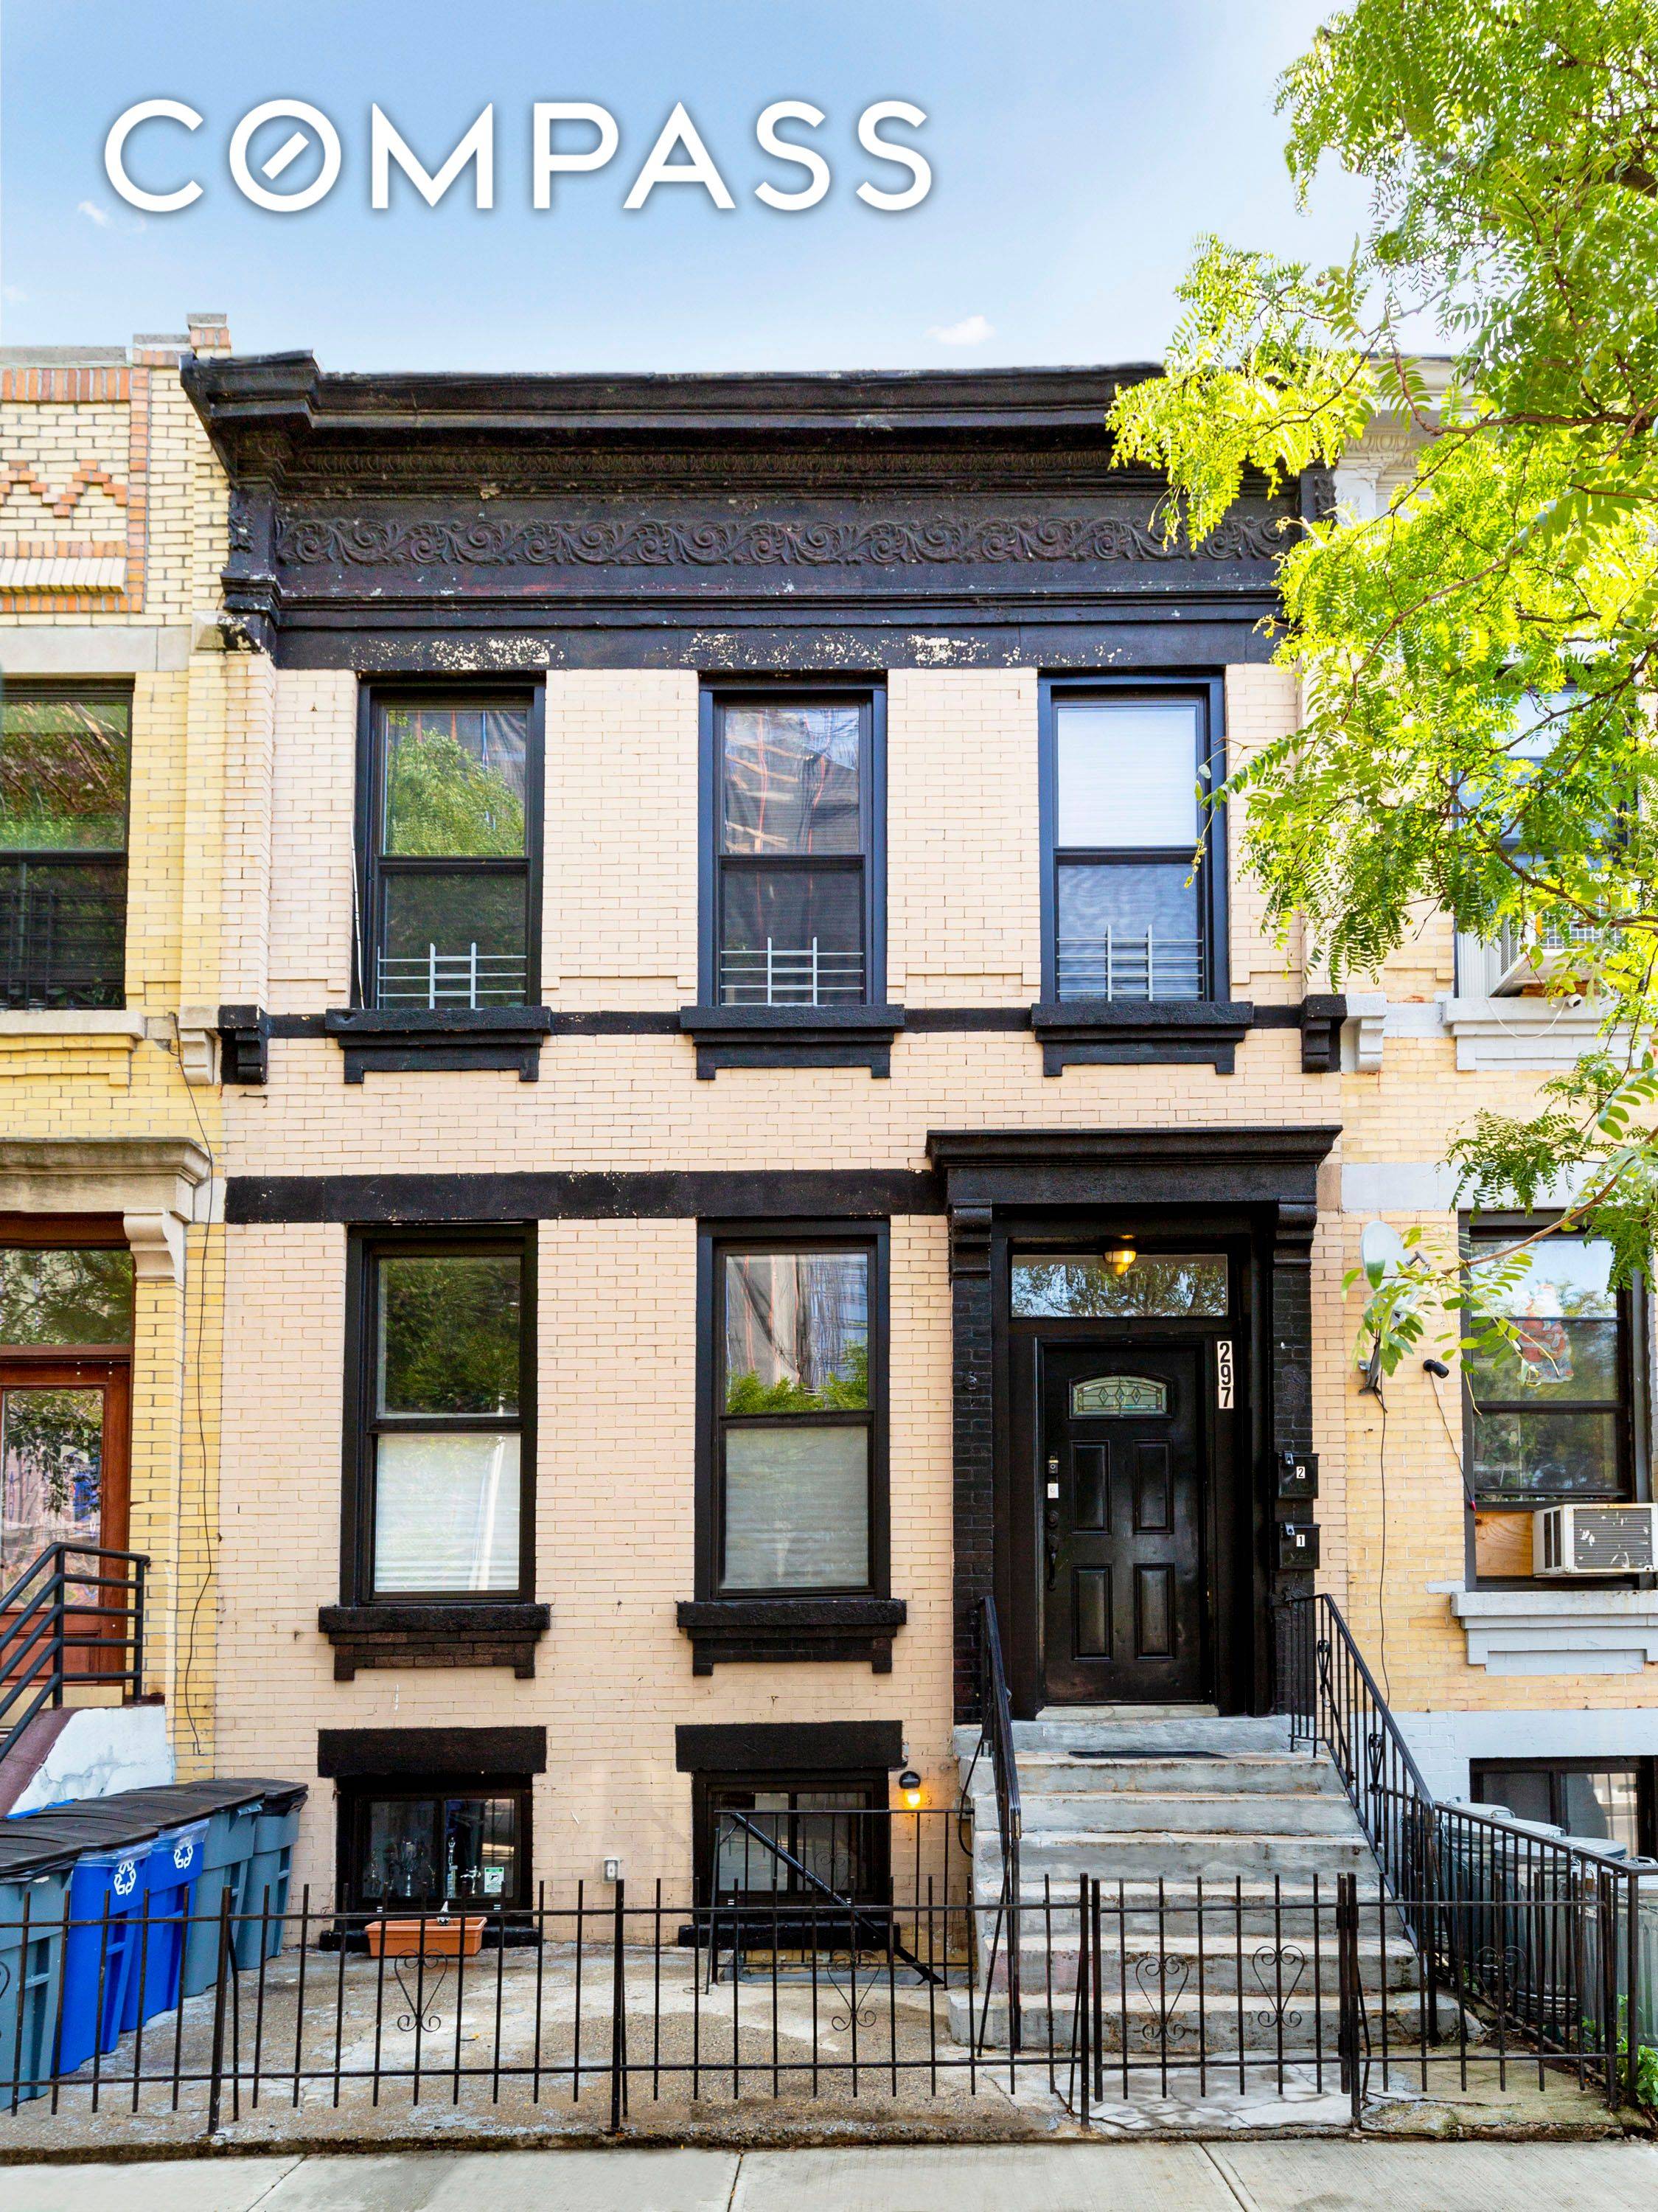 Completely renovated in 2020, this charming two family townhouse boasts striking curb appeal and is now on the market.